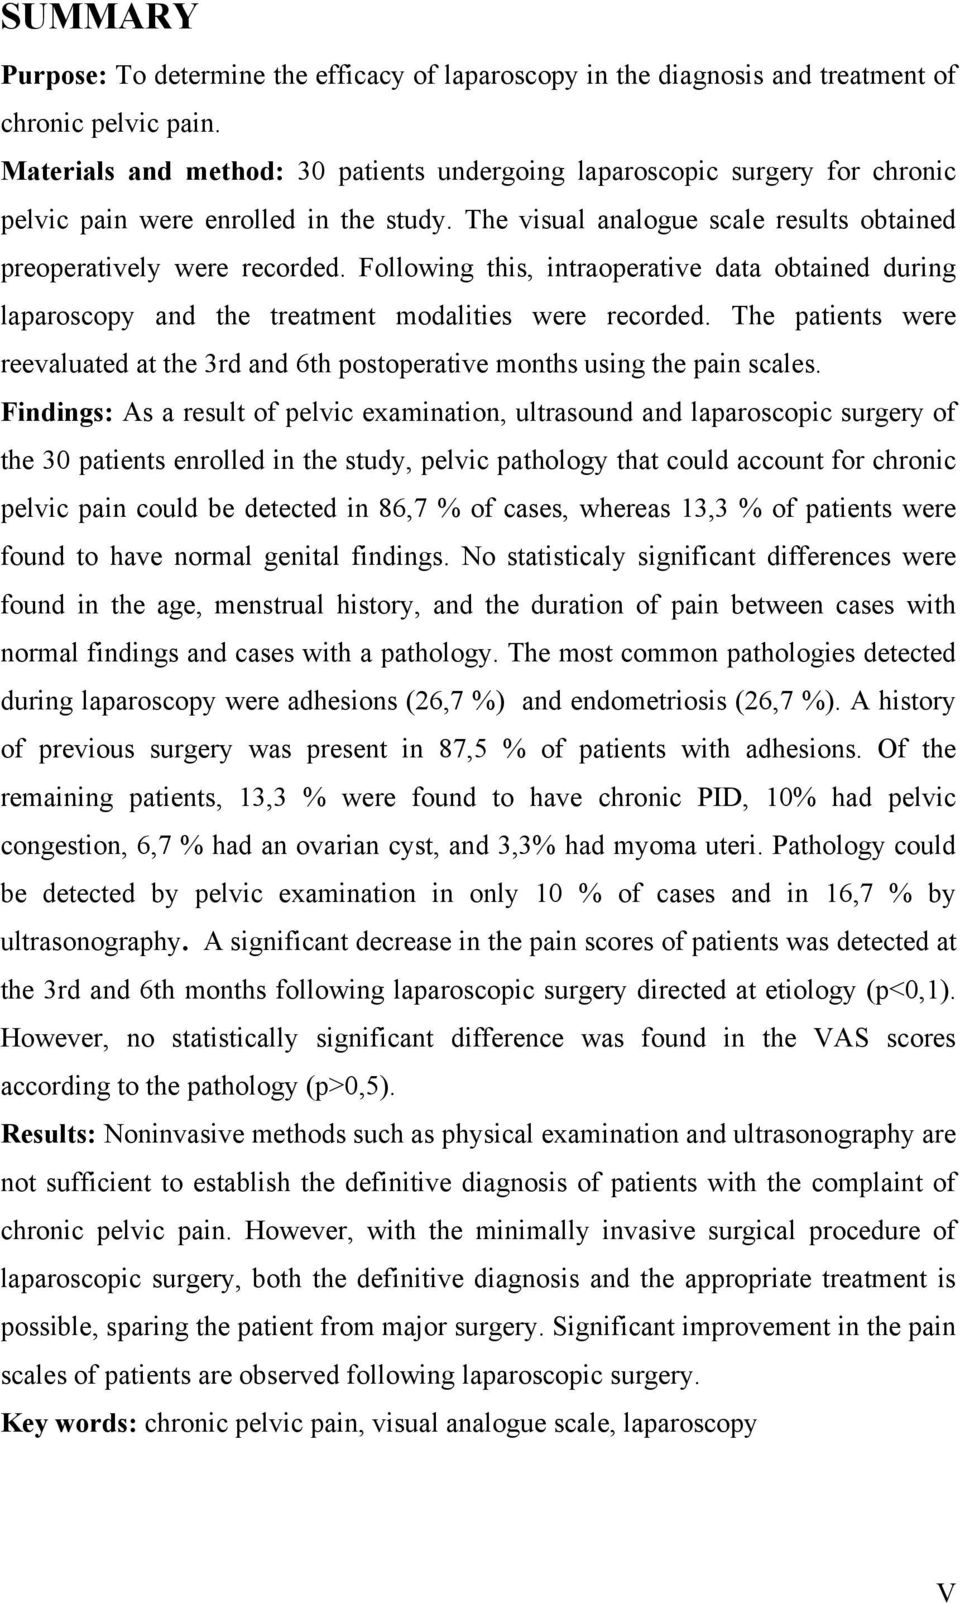 Following this, intraoperative data obtained during laparoscopy and the treatment modalities were recorded. The patients were reevaluated at the 3rd and 6th postoperative months using the pain scales.